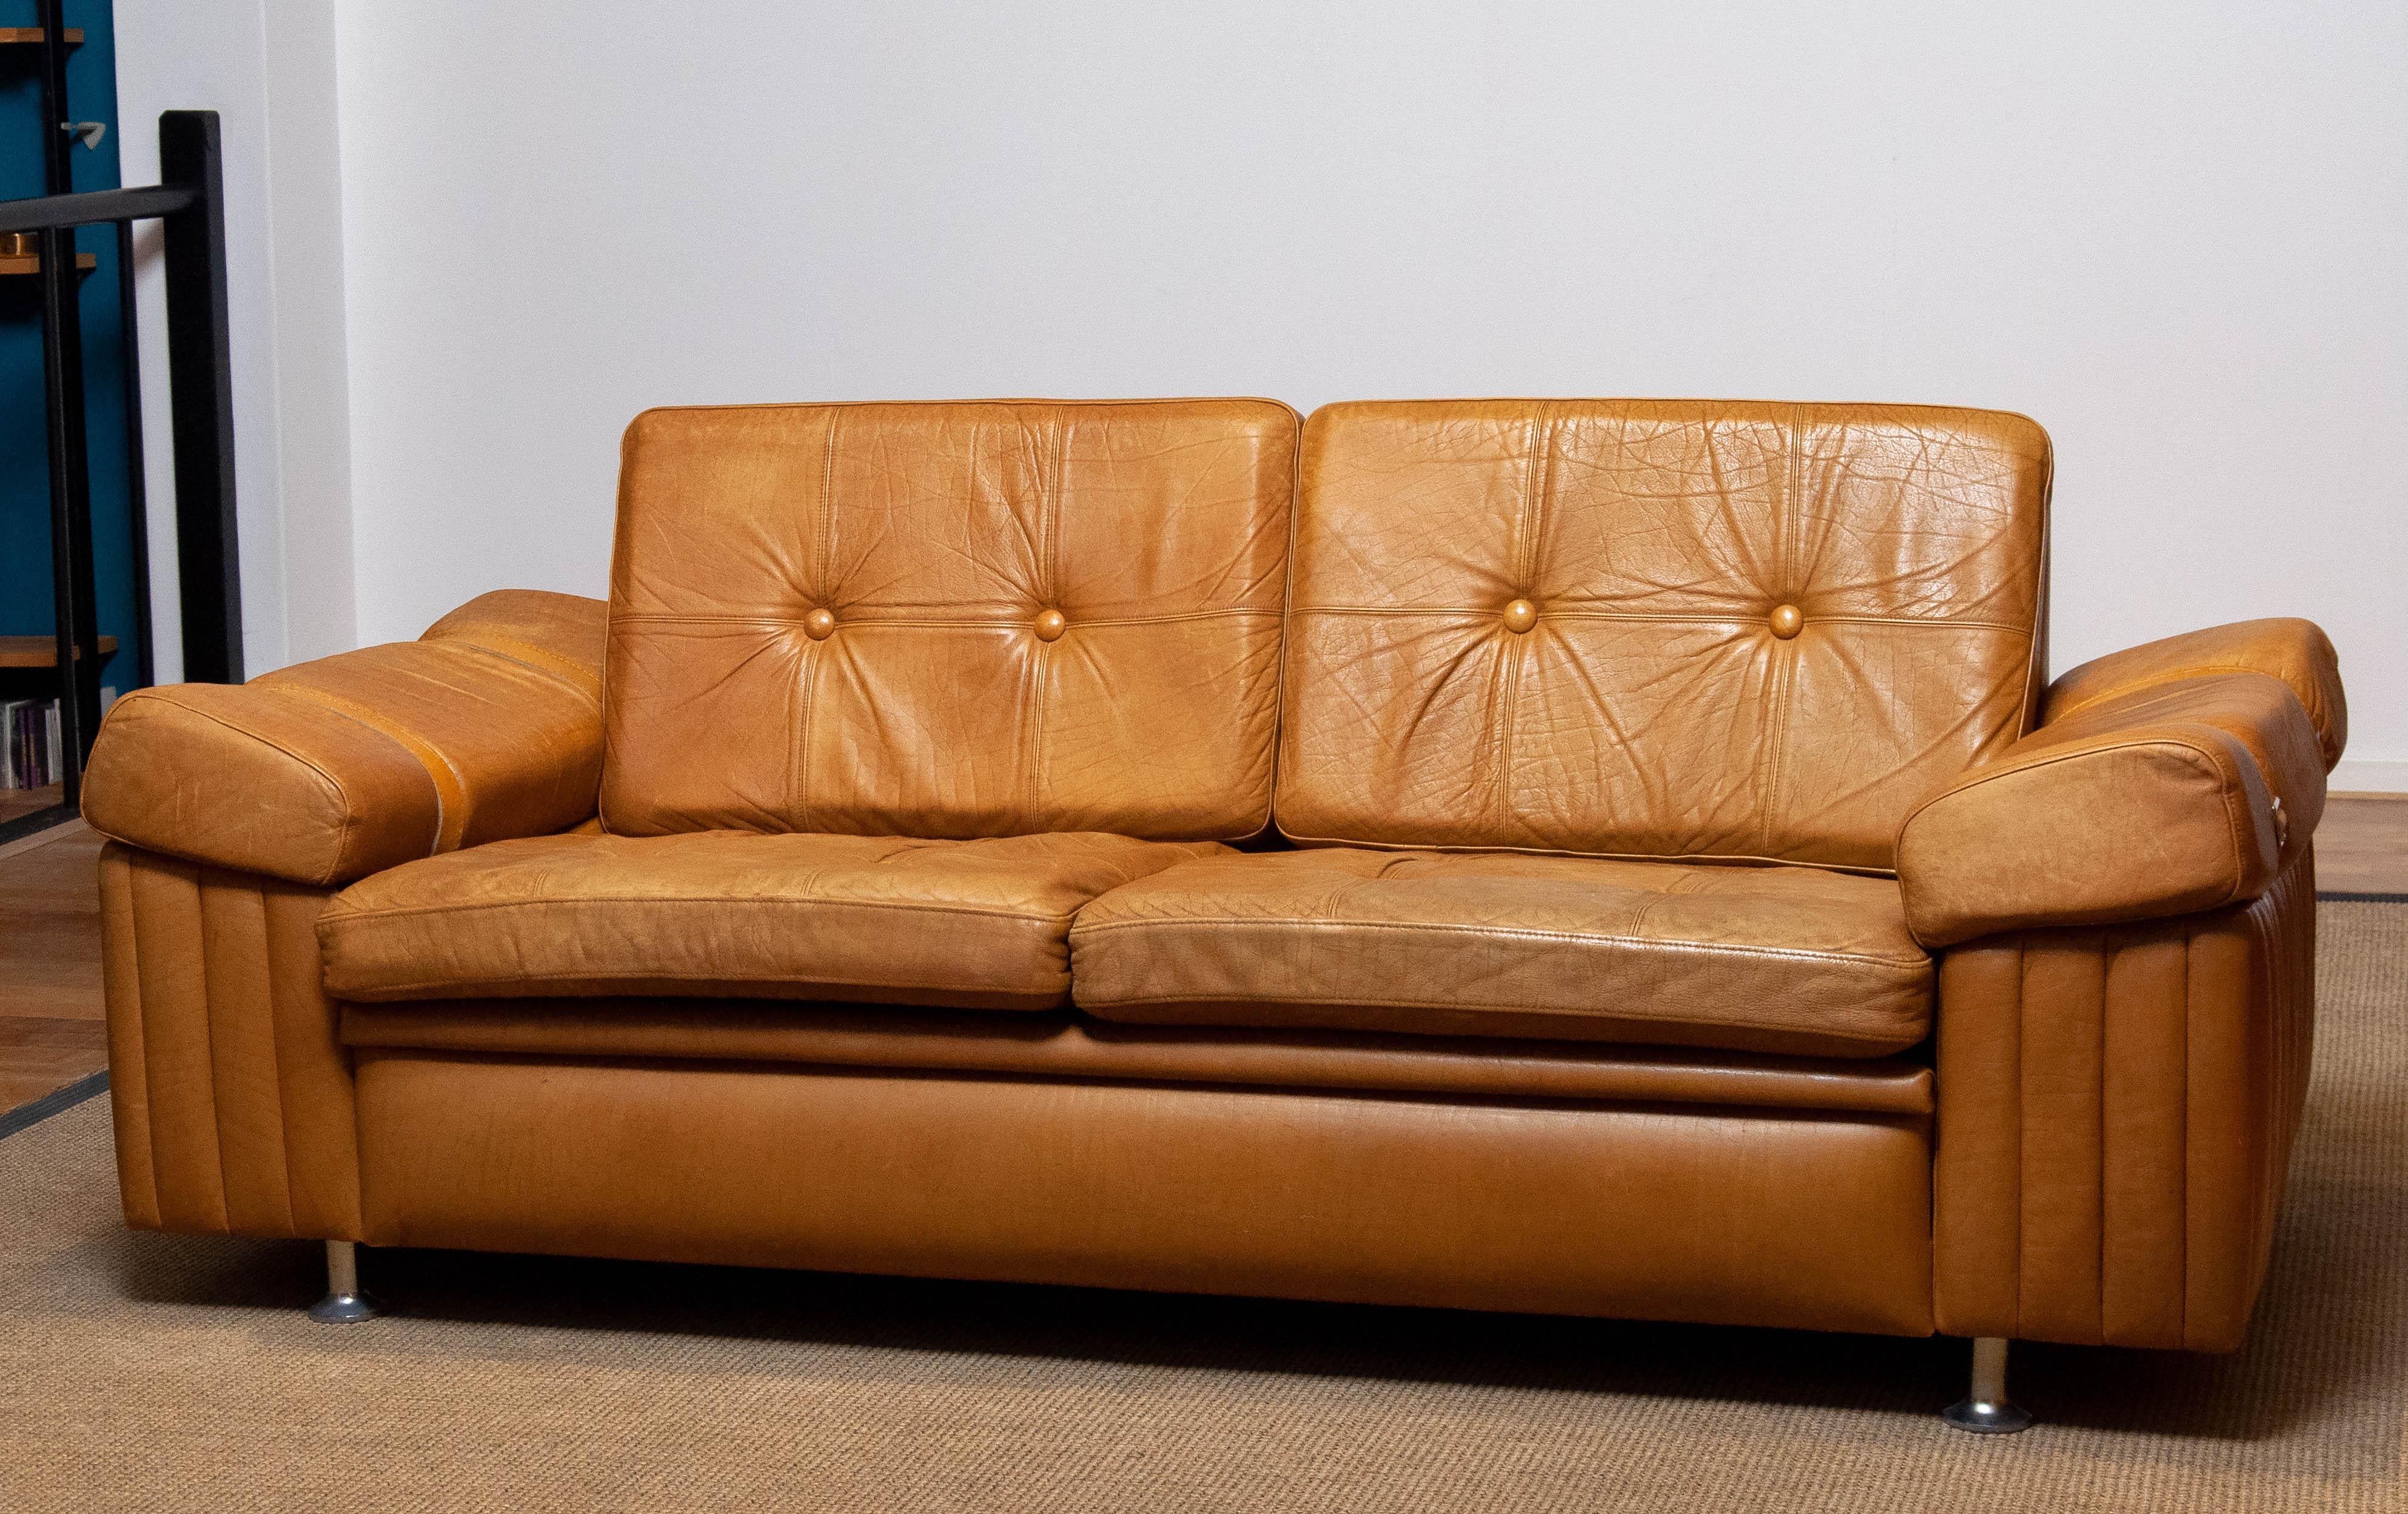 1970s Scandinavian Brutalist Two-Seater Low-Back Sofa in Camel Colored Leather For Sale 5